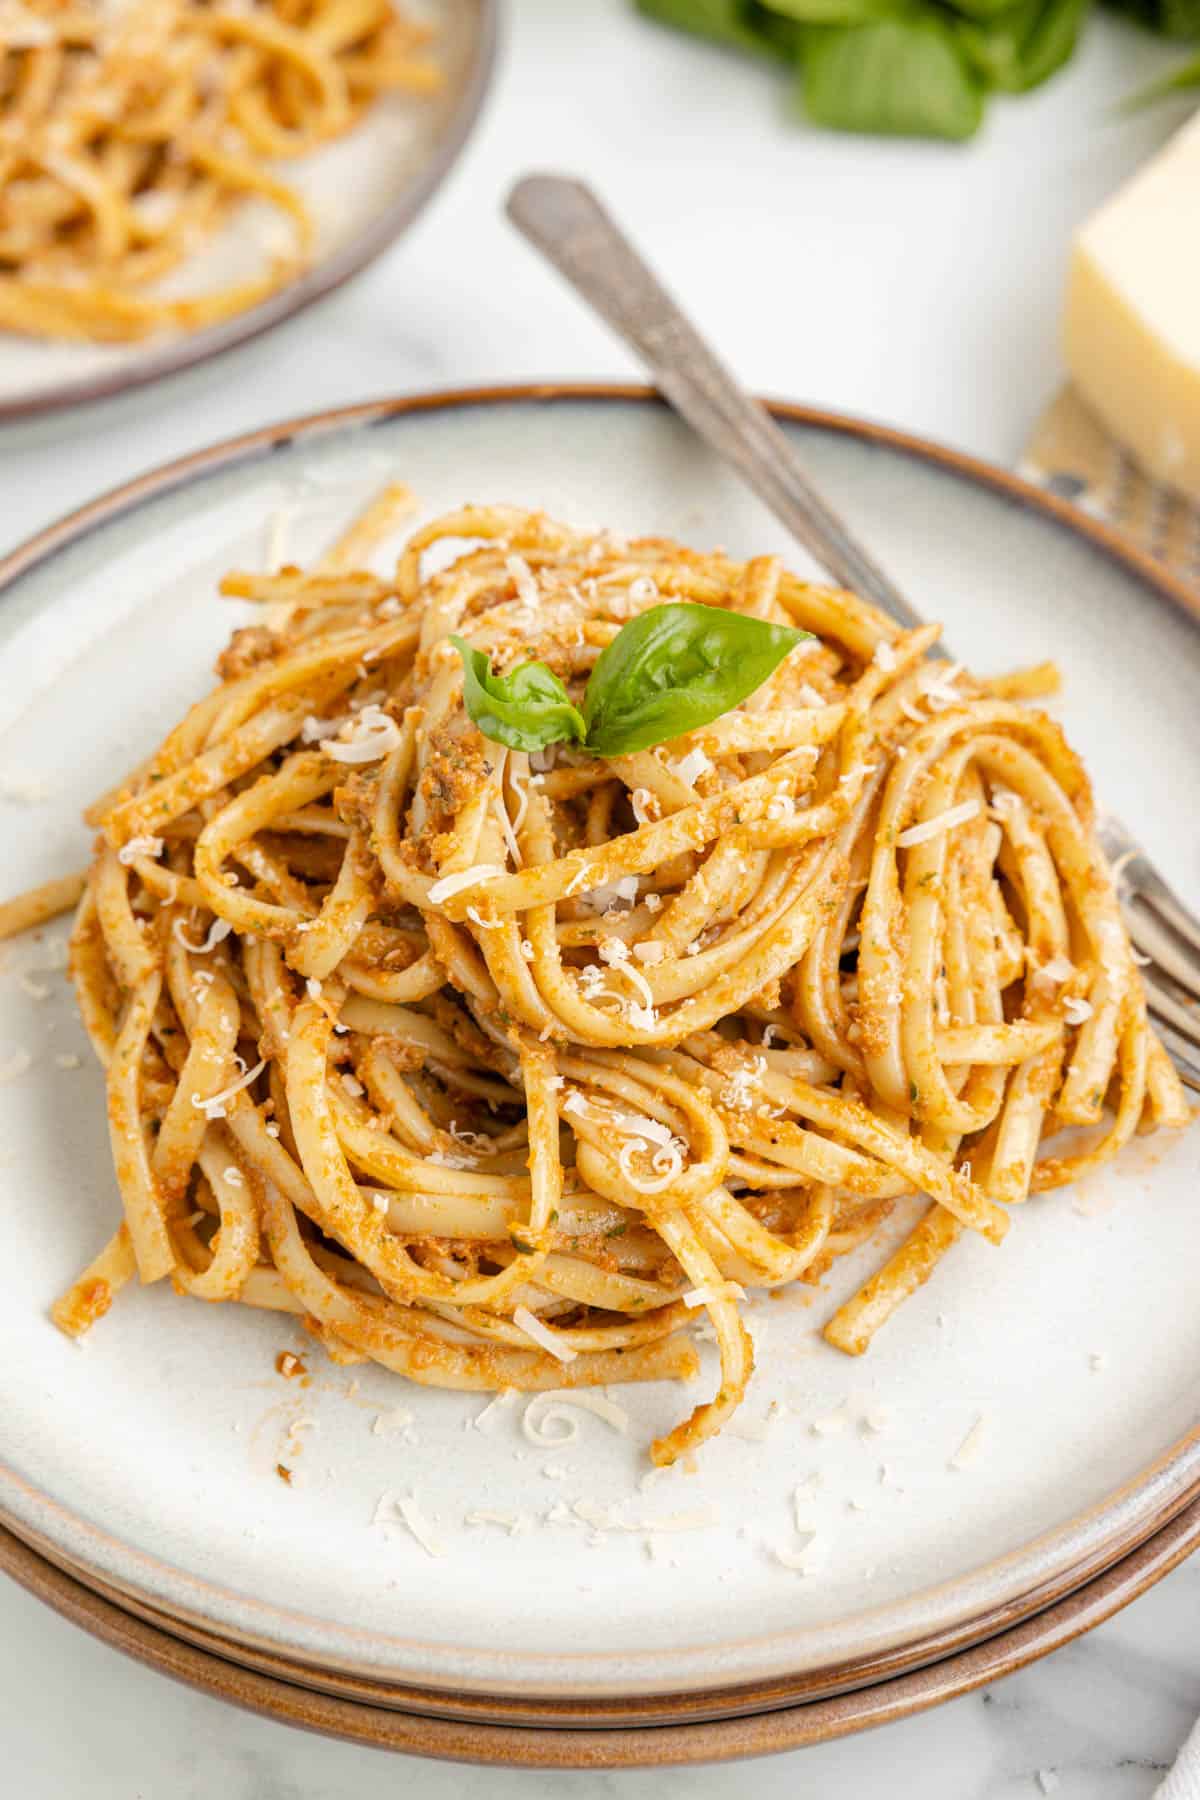 An image of pasta tossed with sun-dried tomato pesto.